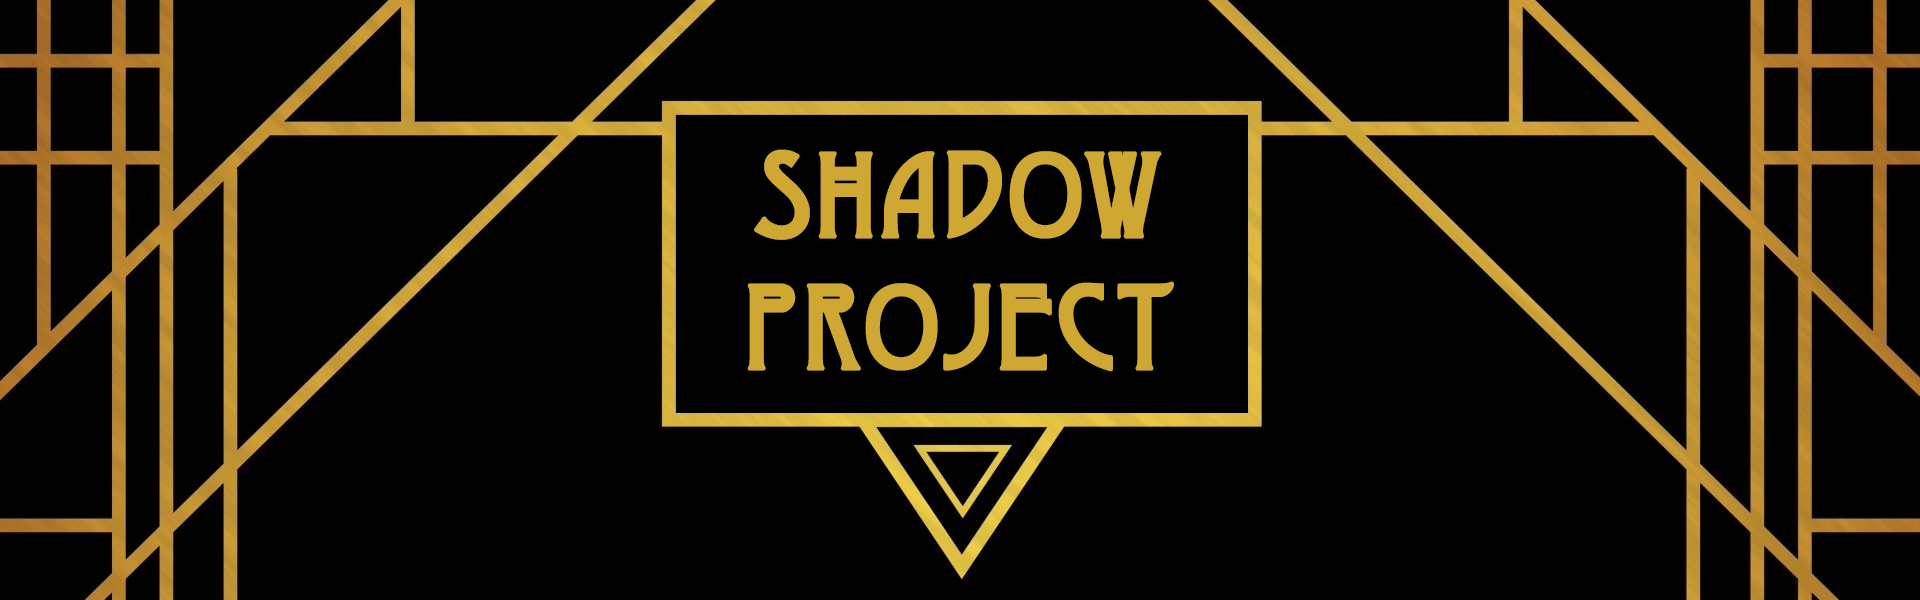 Shadow Project